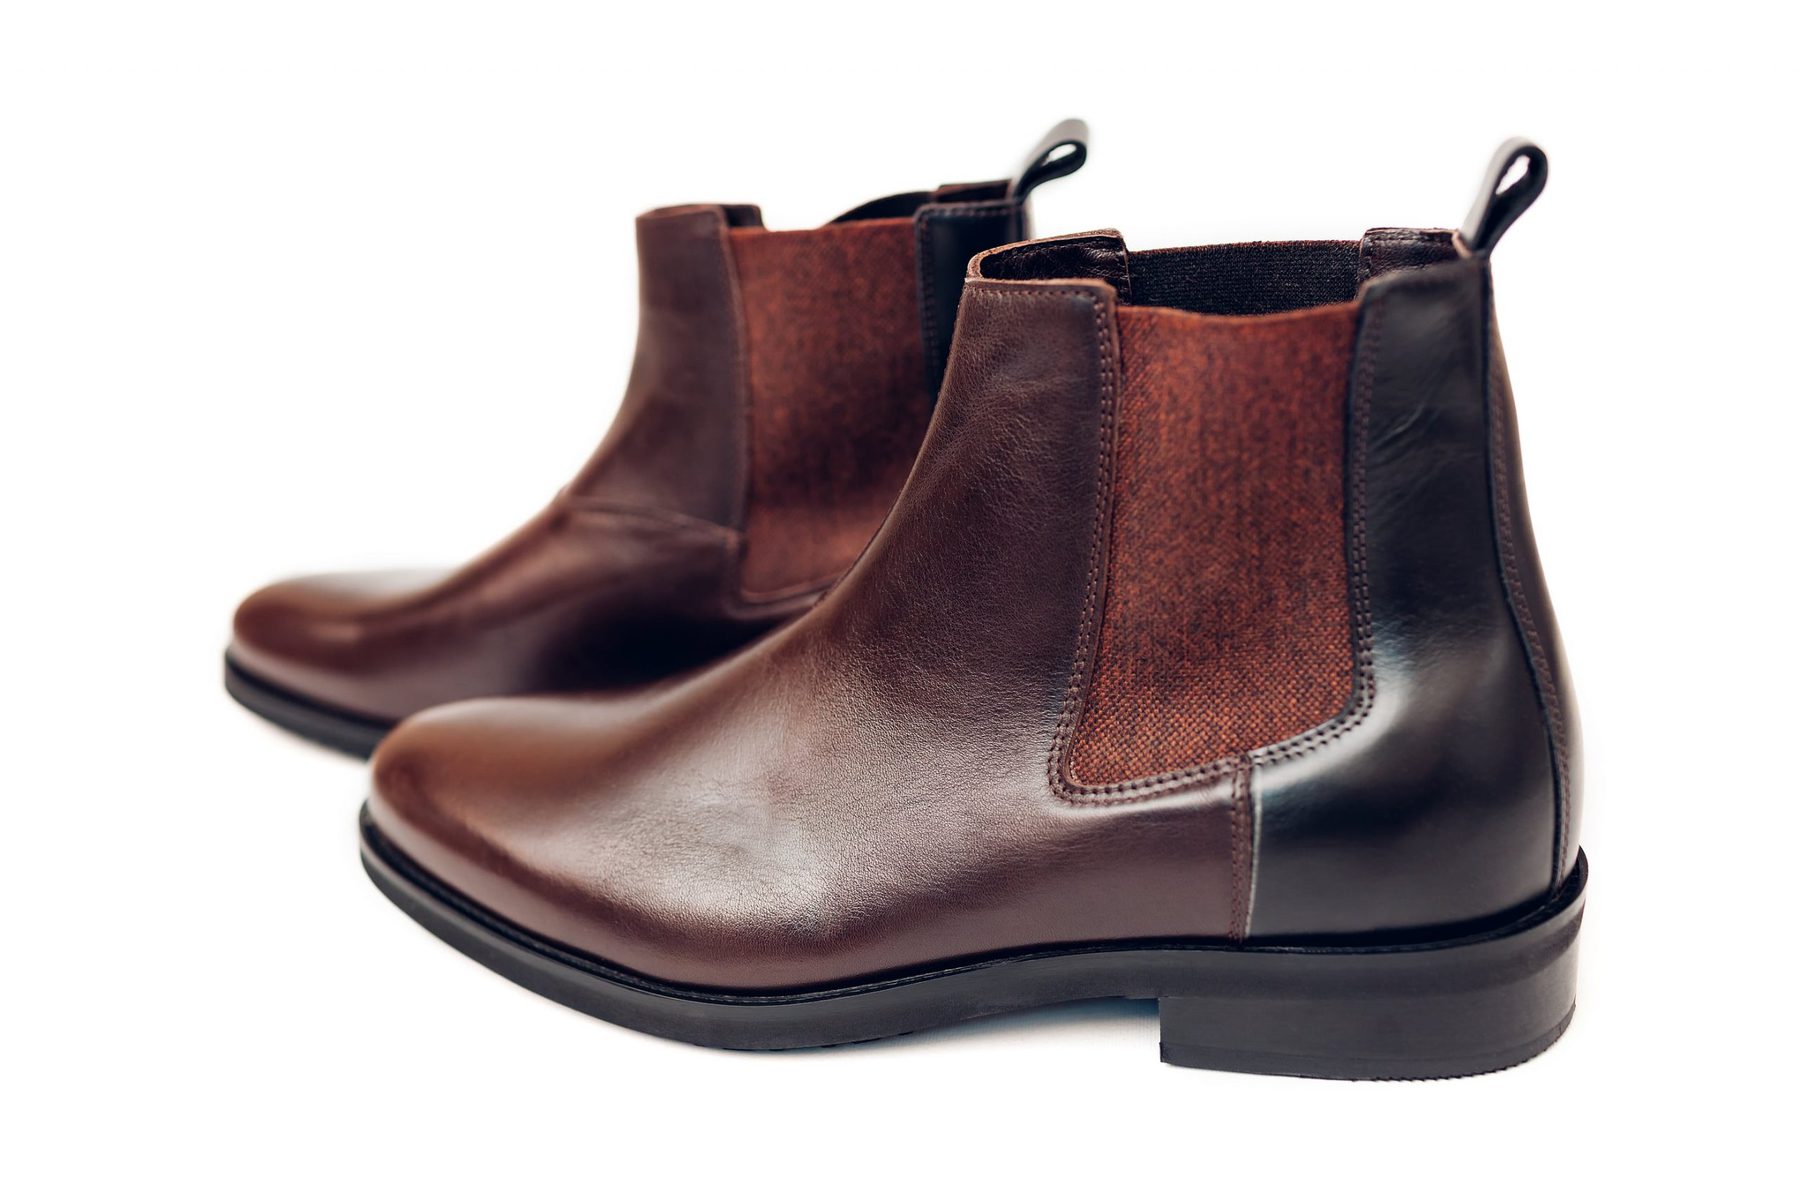 7 Best Men's Chelsea Boots to Wear With 